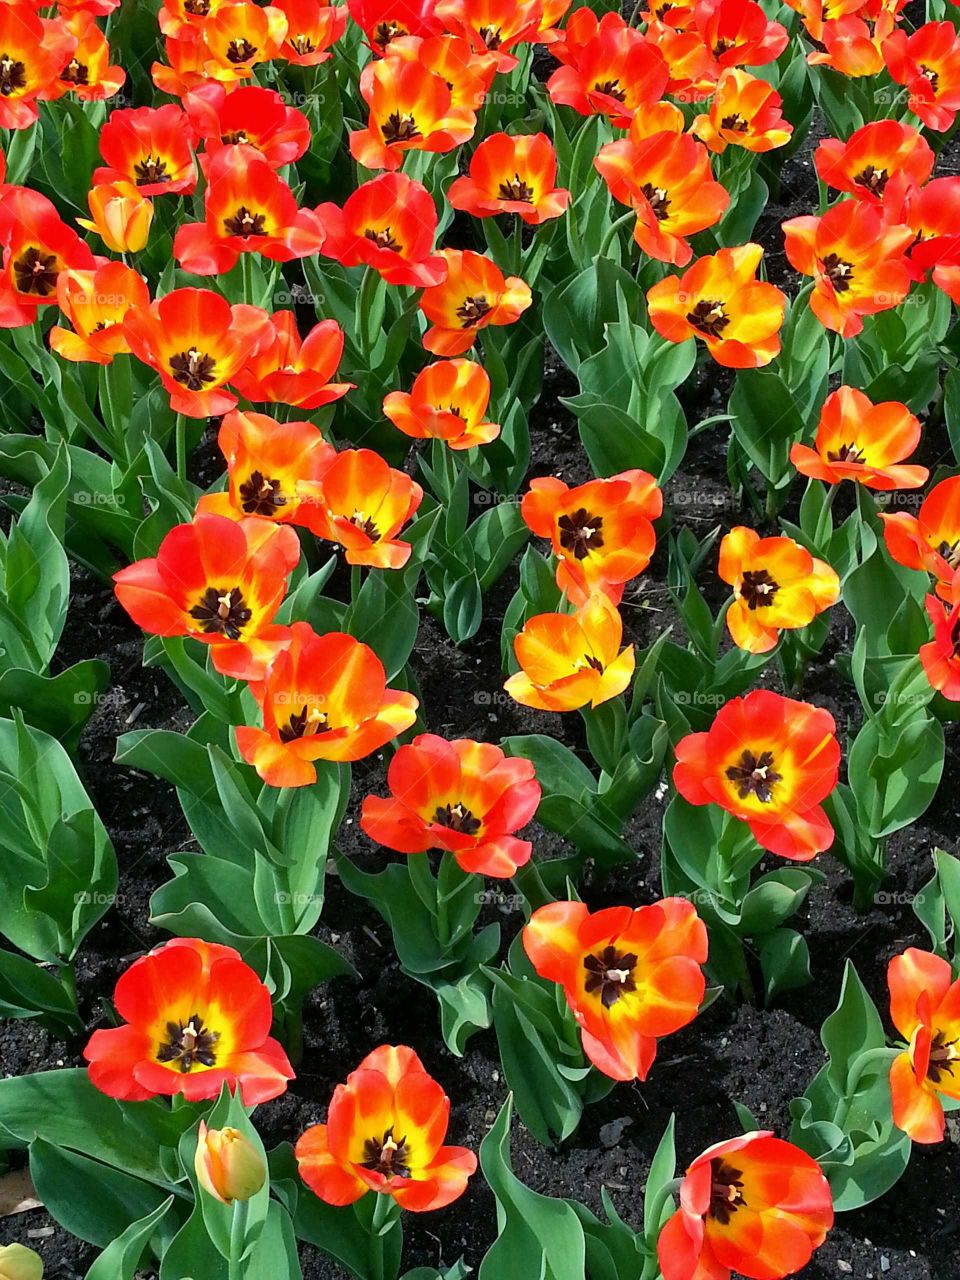 Several red and yellow tulips